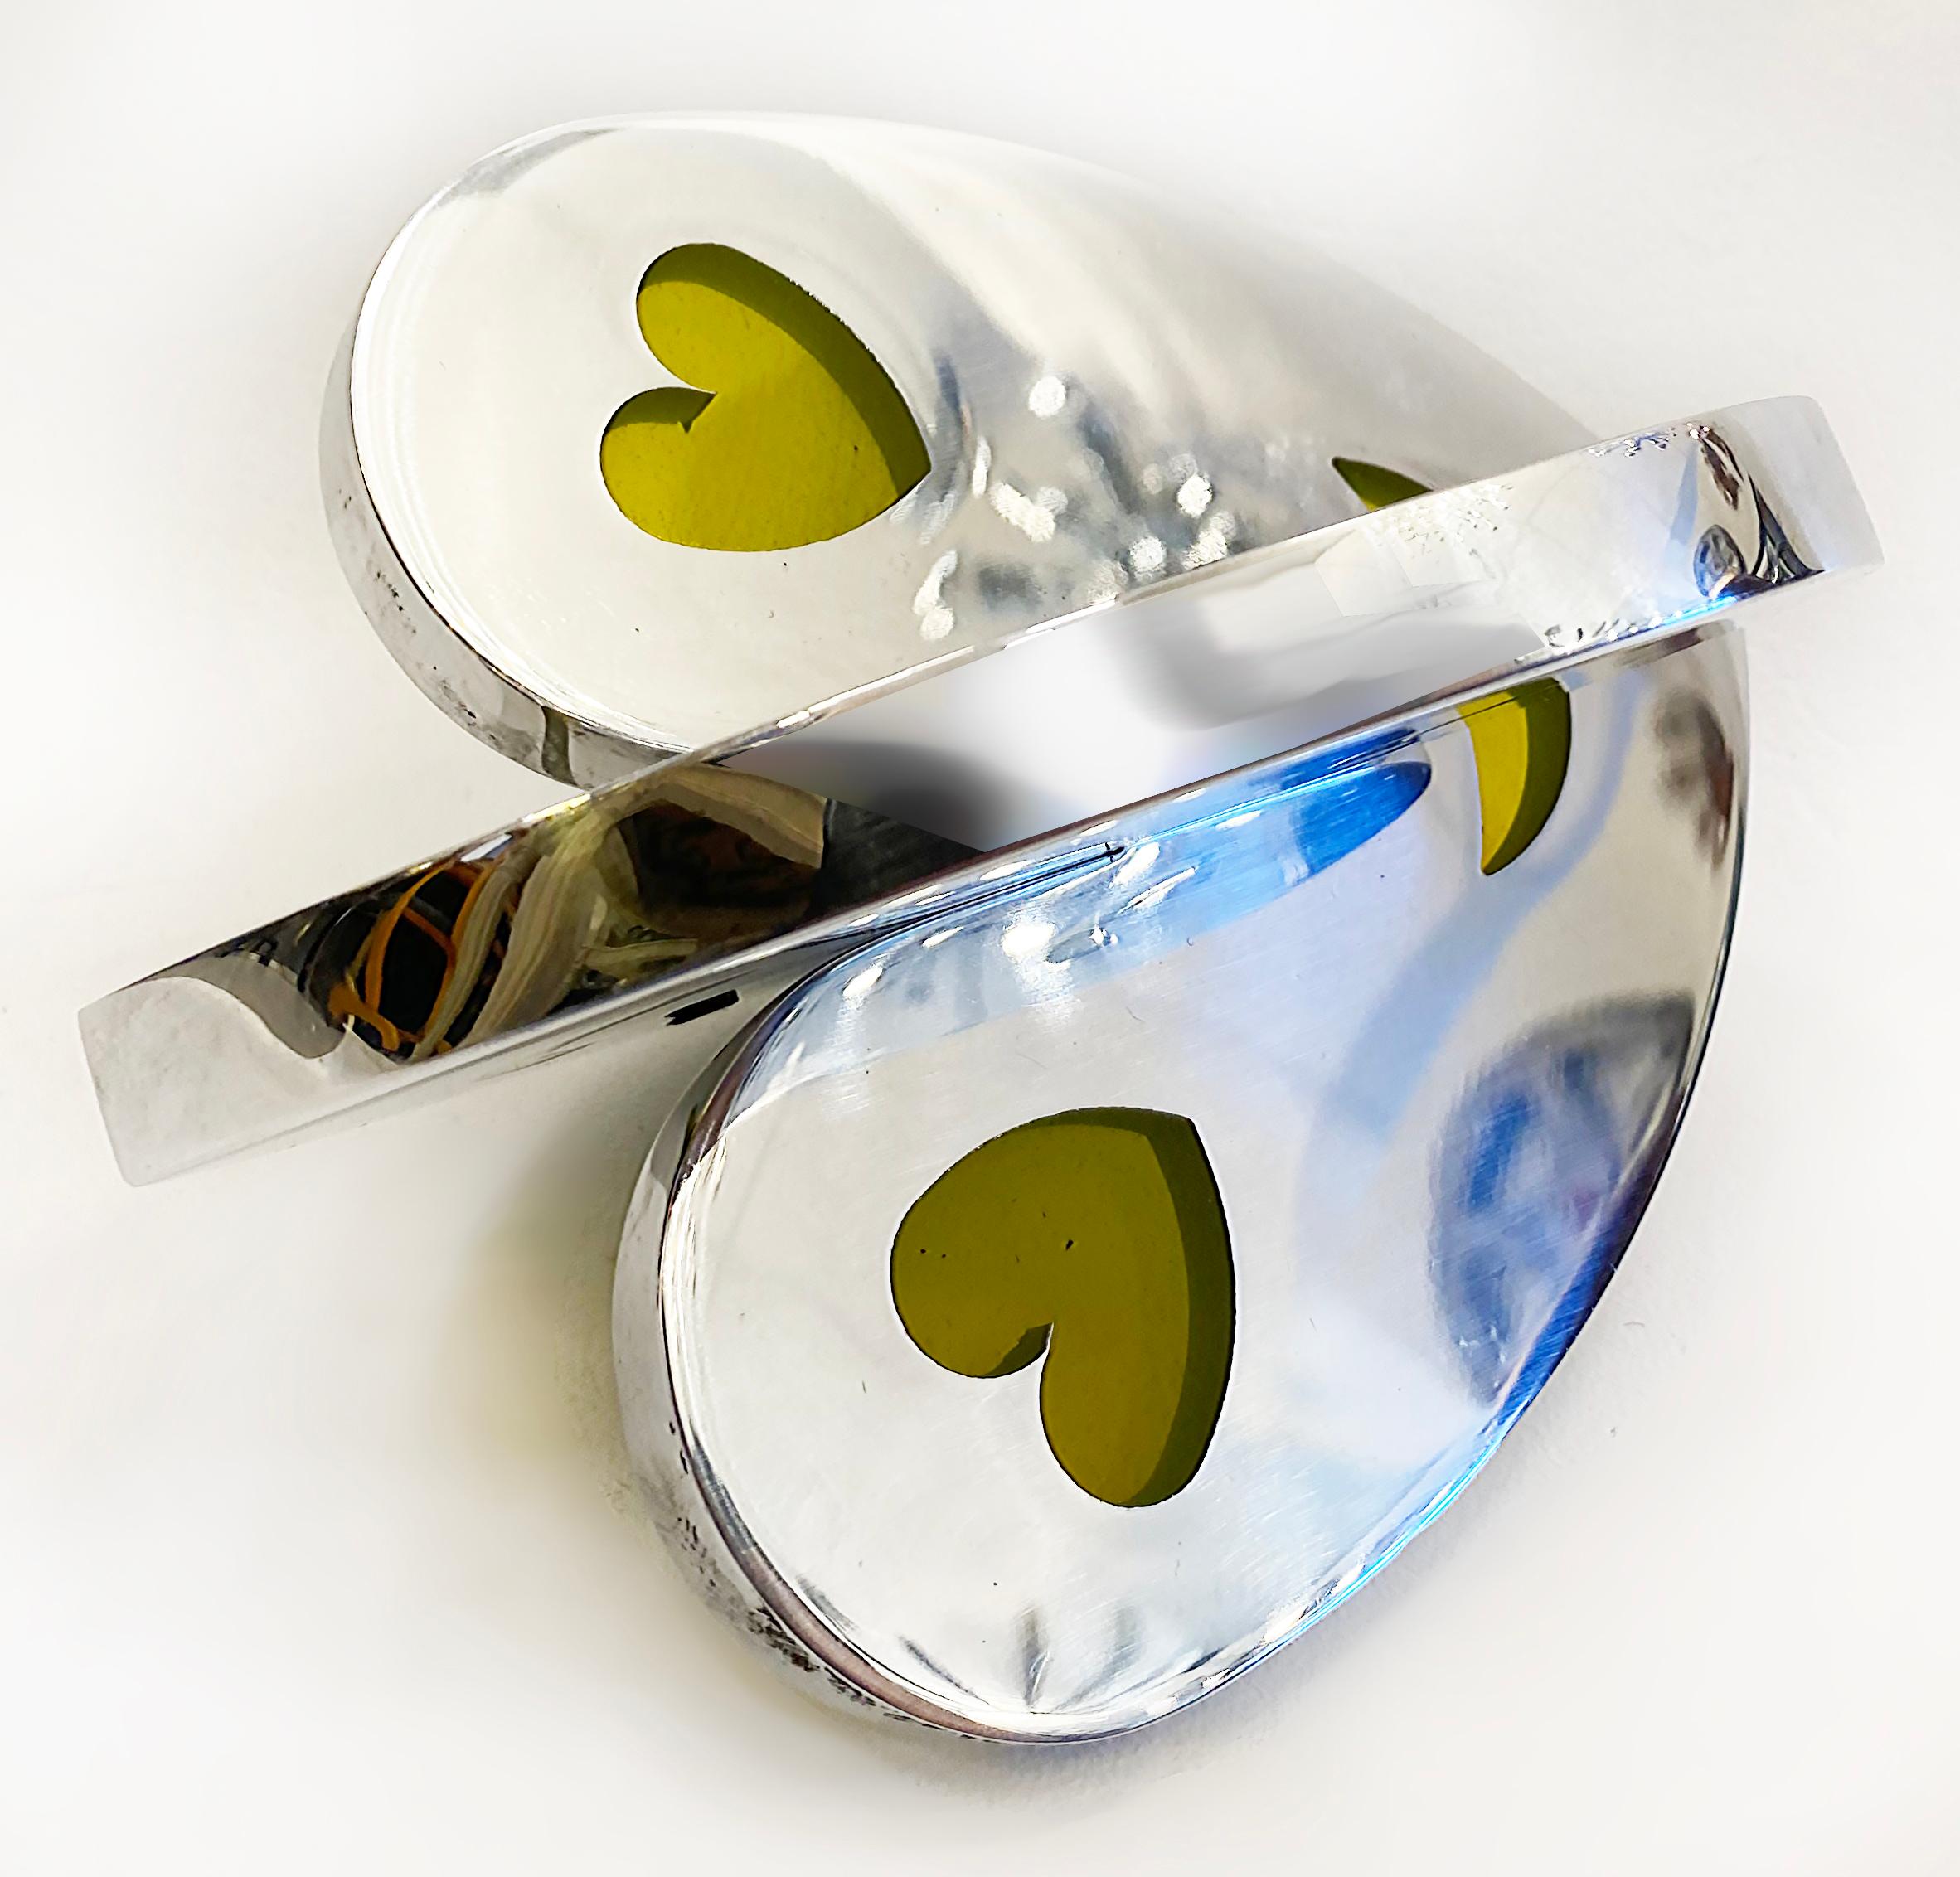 Polished Aluminum, Resin Interlocking Hearts Sculpture by Michael Gitter For Sale 1